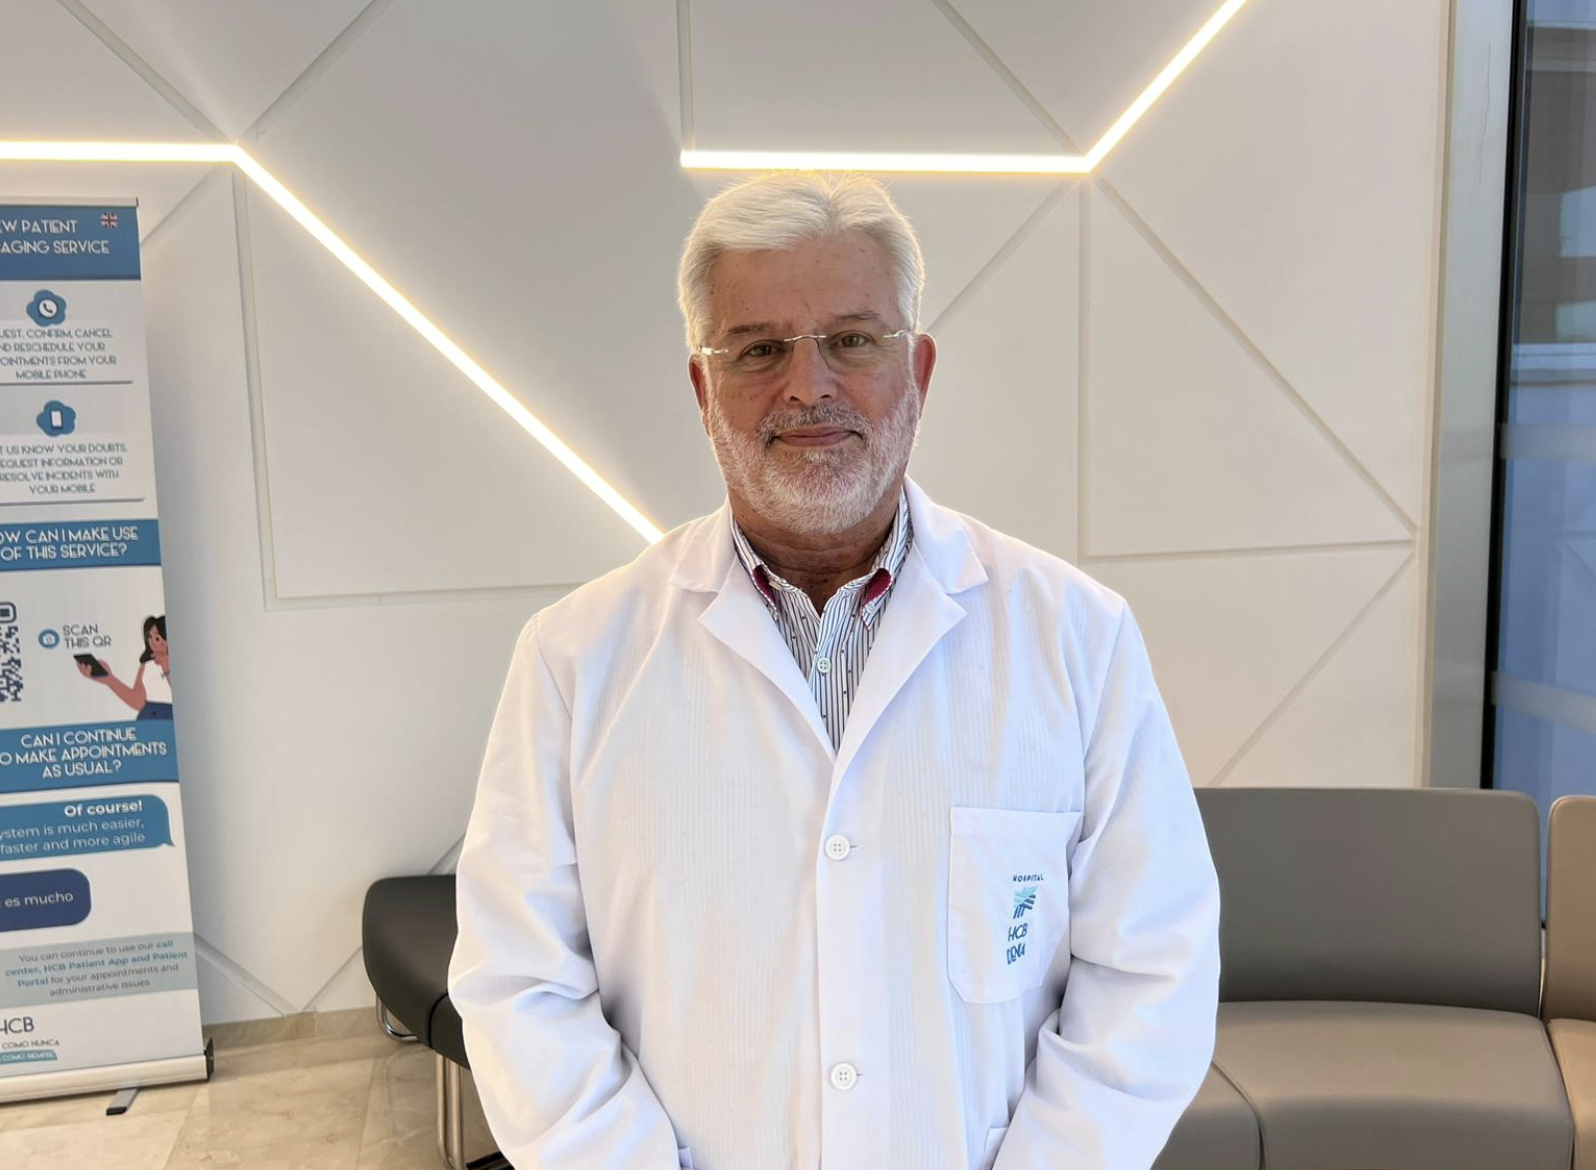 HCB Denia improves its Gynecology service with the incorporation of Dr. Jorge Muñoz Cabrera and a multidisciplinary team that allows the care of any gynecological problem